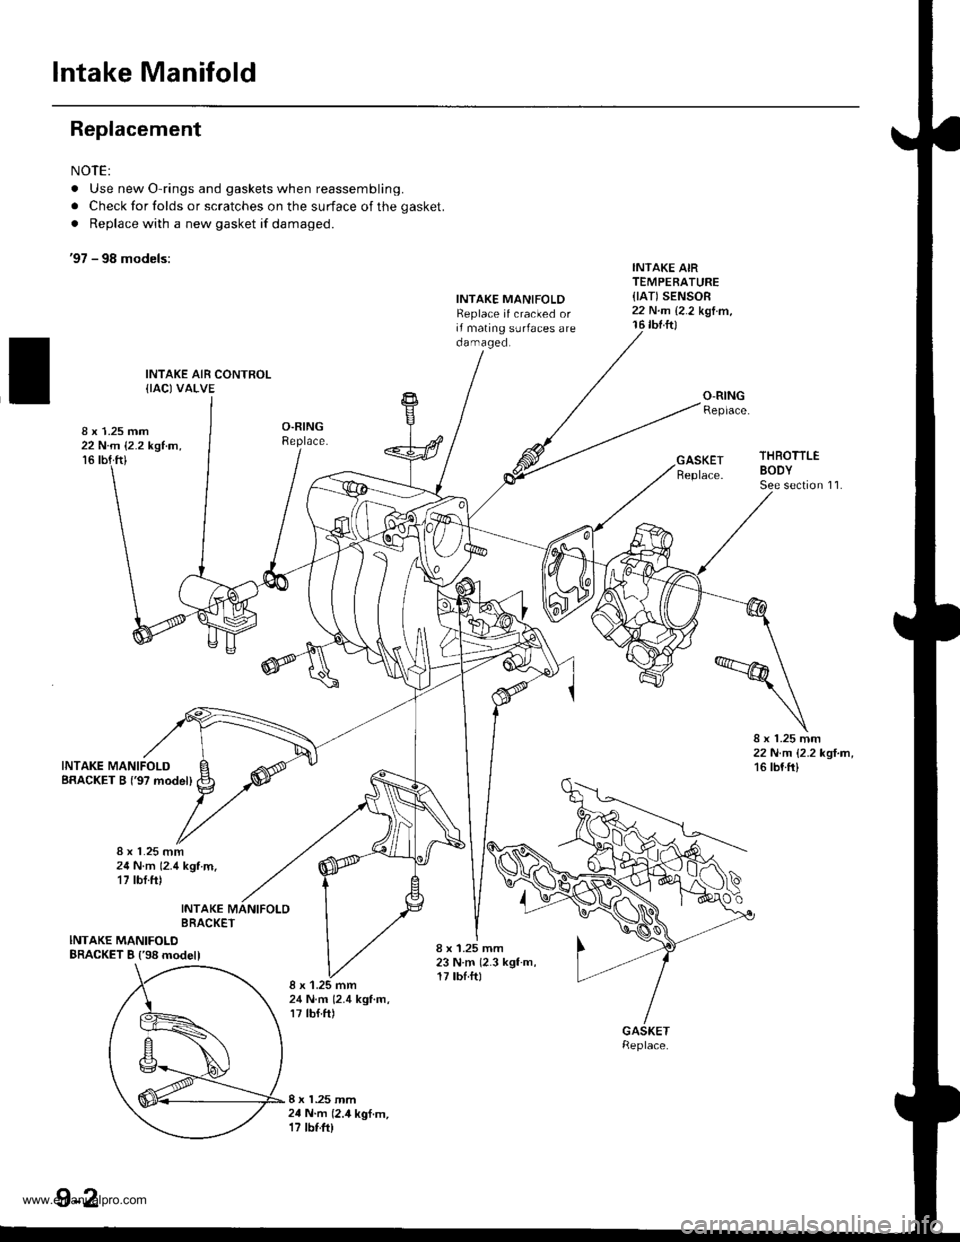 HONDA CR-V 1997 RD1-RD3 / 1.G Workshop Manual 
Intake Manifold
Replacement
NOTE:
. Use new O-rings and gaskets when reassembling.
. Check for folds or scratches on the surface of the gasket.
. Replace with a new gasket if damaged.
97 - 98 models